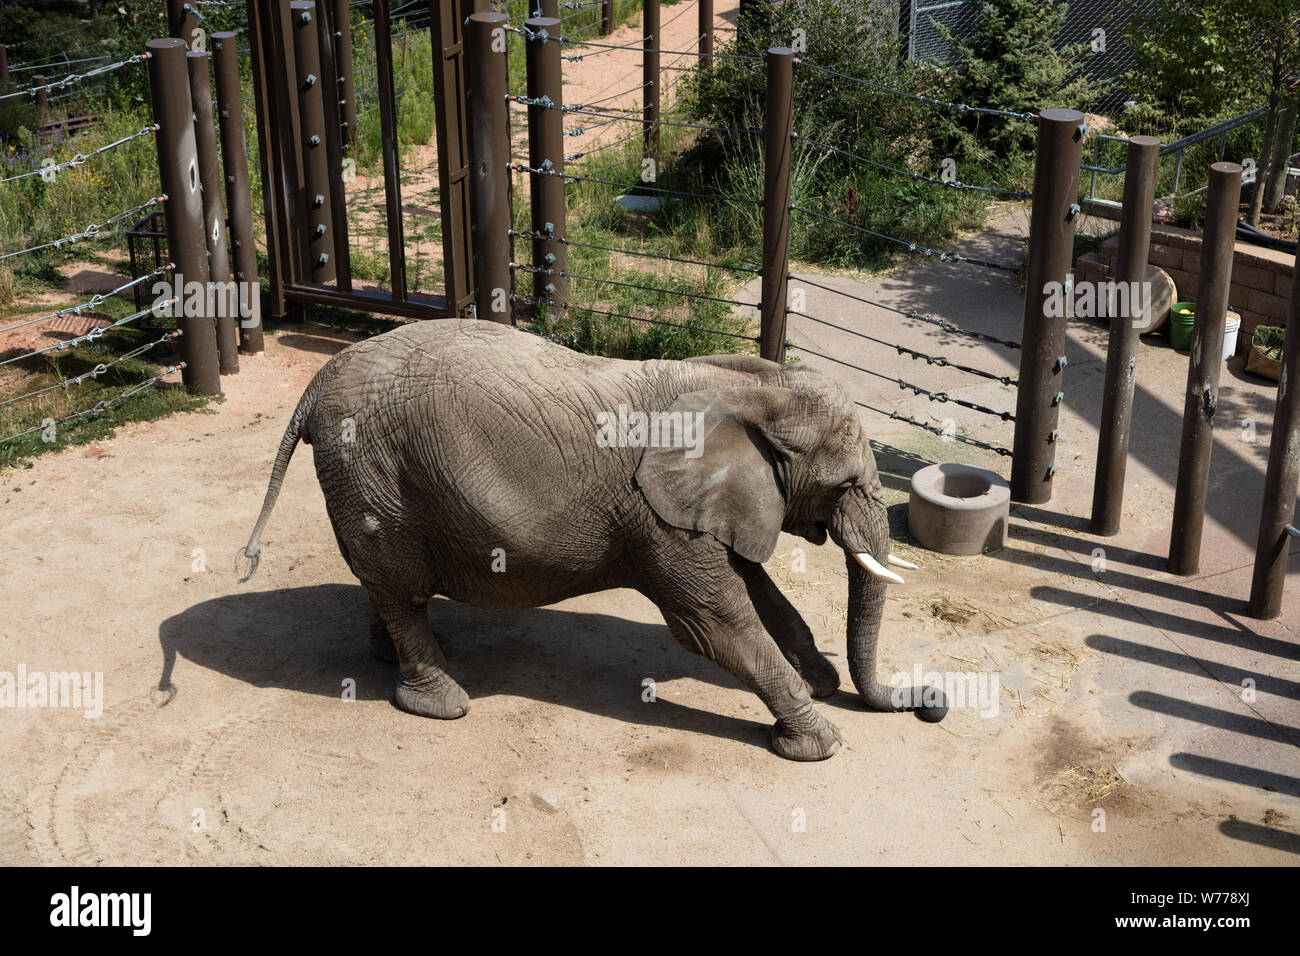 A  frisky elephant at the Cheyenne Mountain Zoo in Colorado Springs, Colorado Physical description: 1 photograph : digital, tiff file, color.  Notes: Purchase; Carol M. Highsmith Photography, Inc.; 2015; (DLC/PP-2015:068).; Forms part of: Gates Frontiers Fund Colorado Collection within the Carol M. Highsmith Archive.; Stock Photo